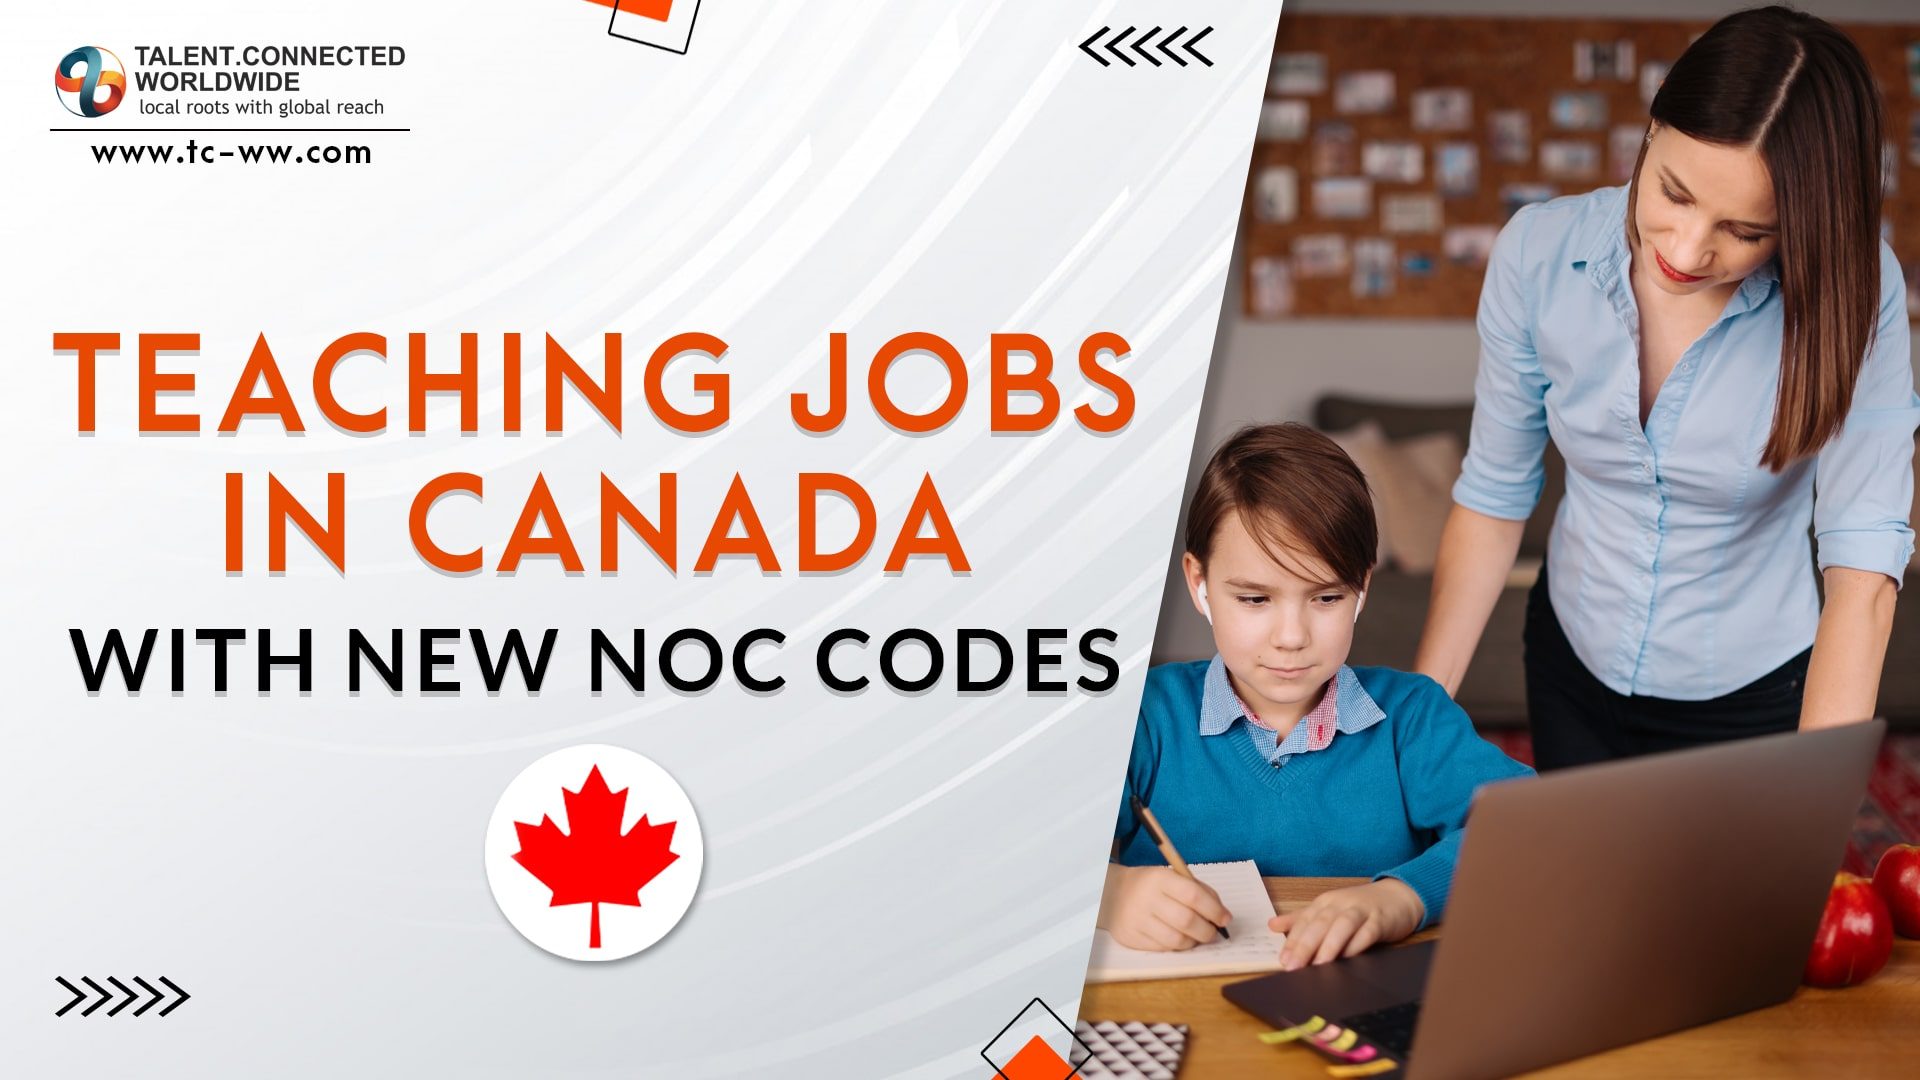 Teaching Jobs in Canada with New NOC Codes